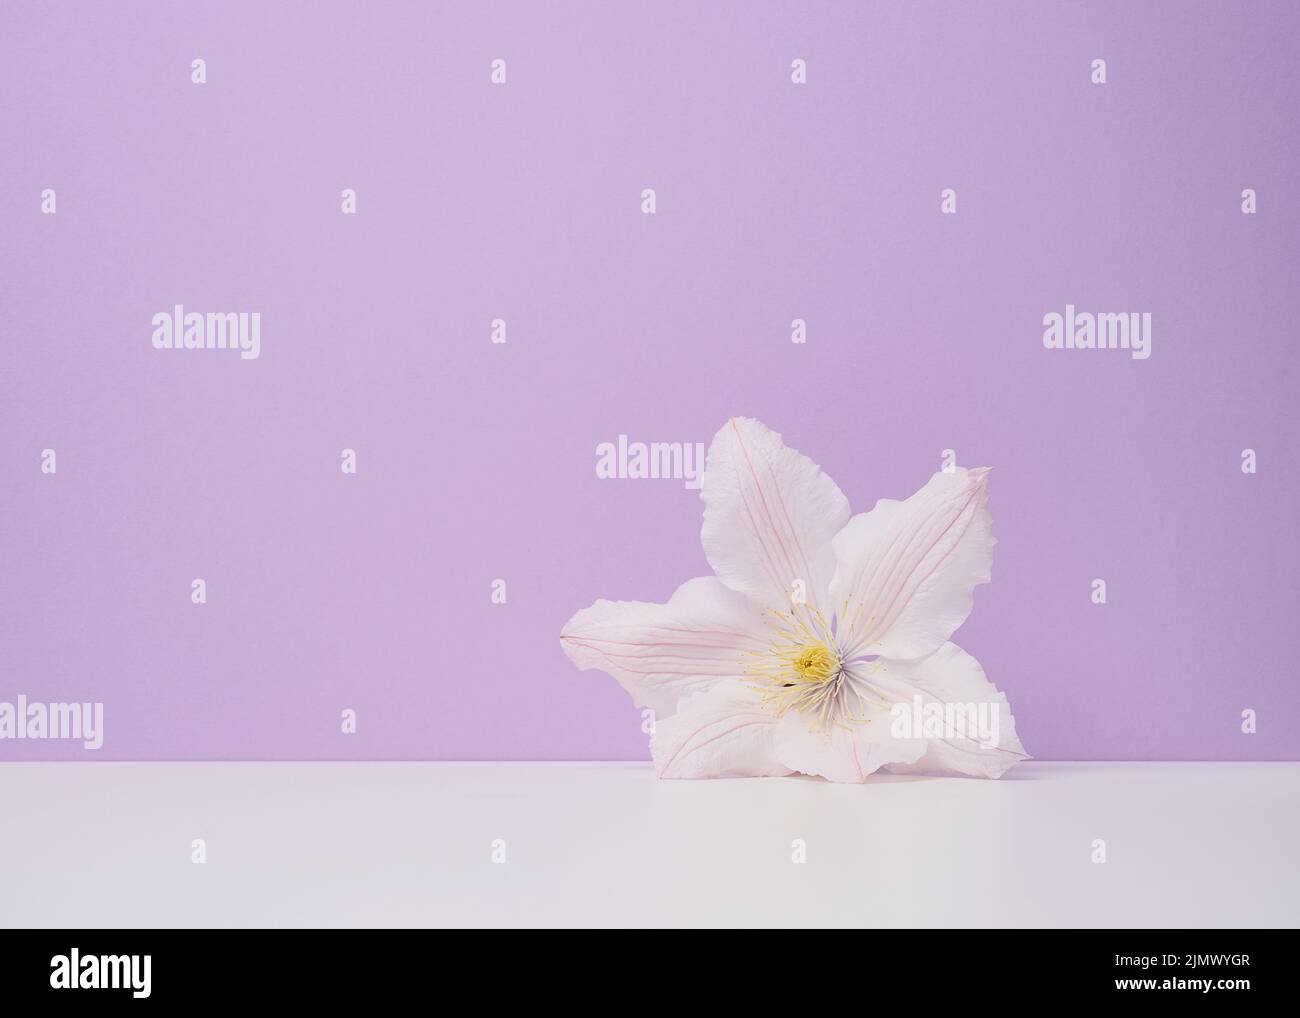 White clematis flower on purple paper background Stock Photo